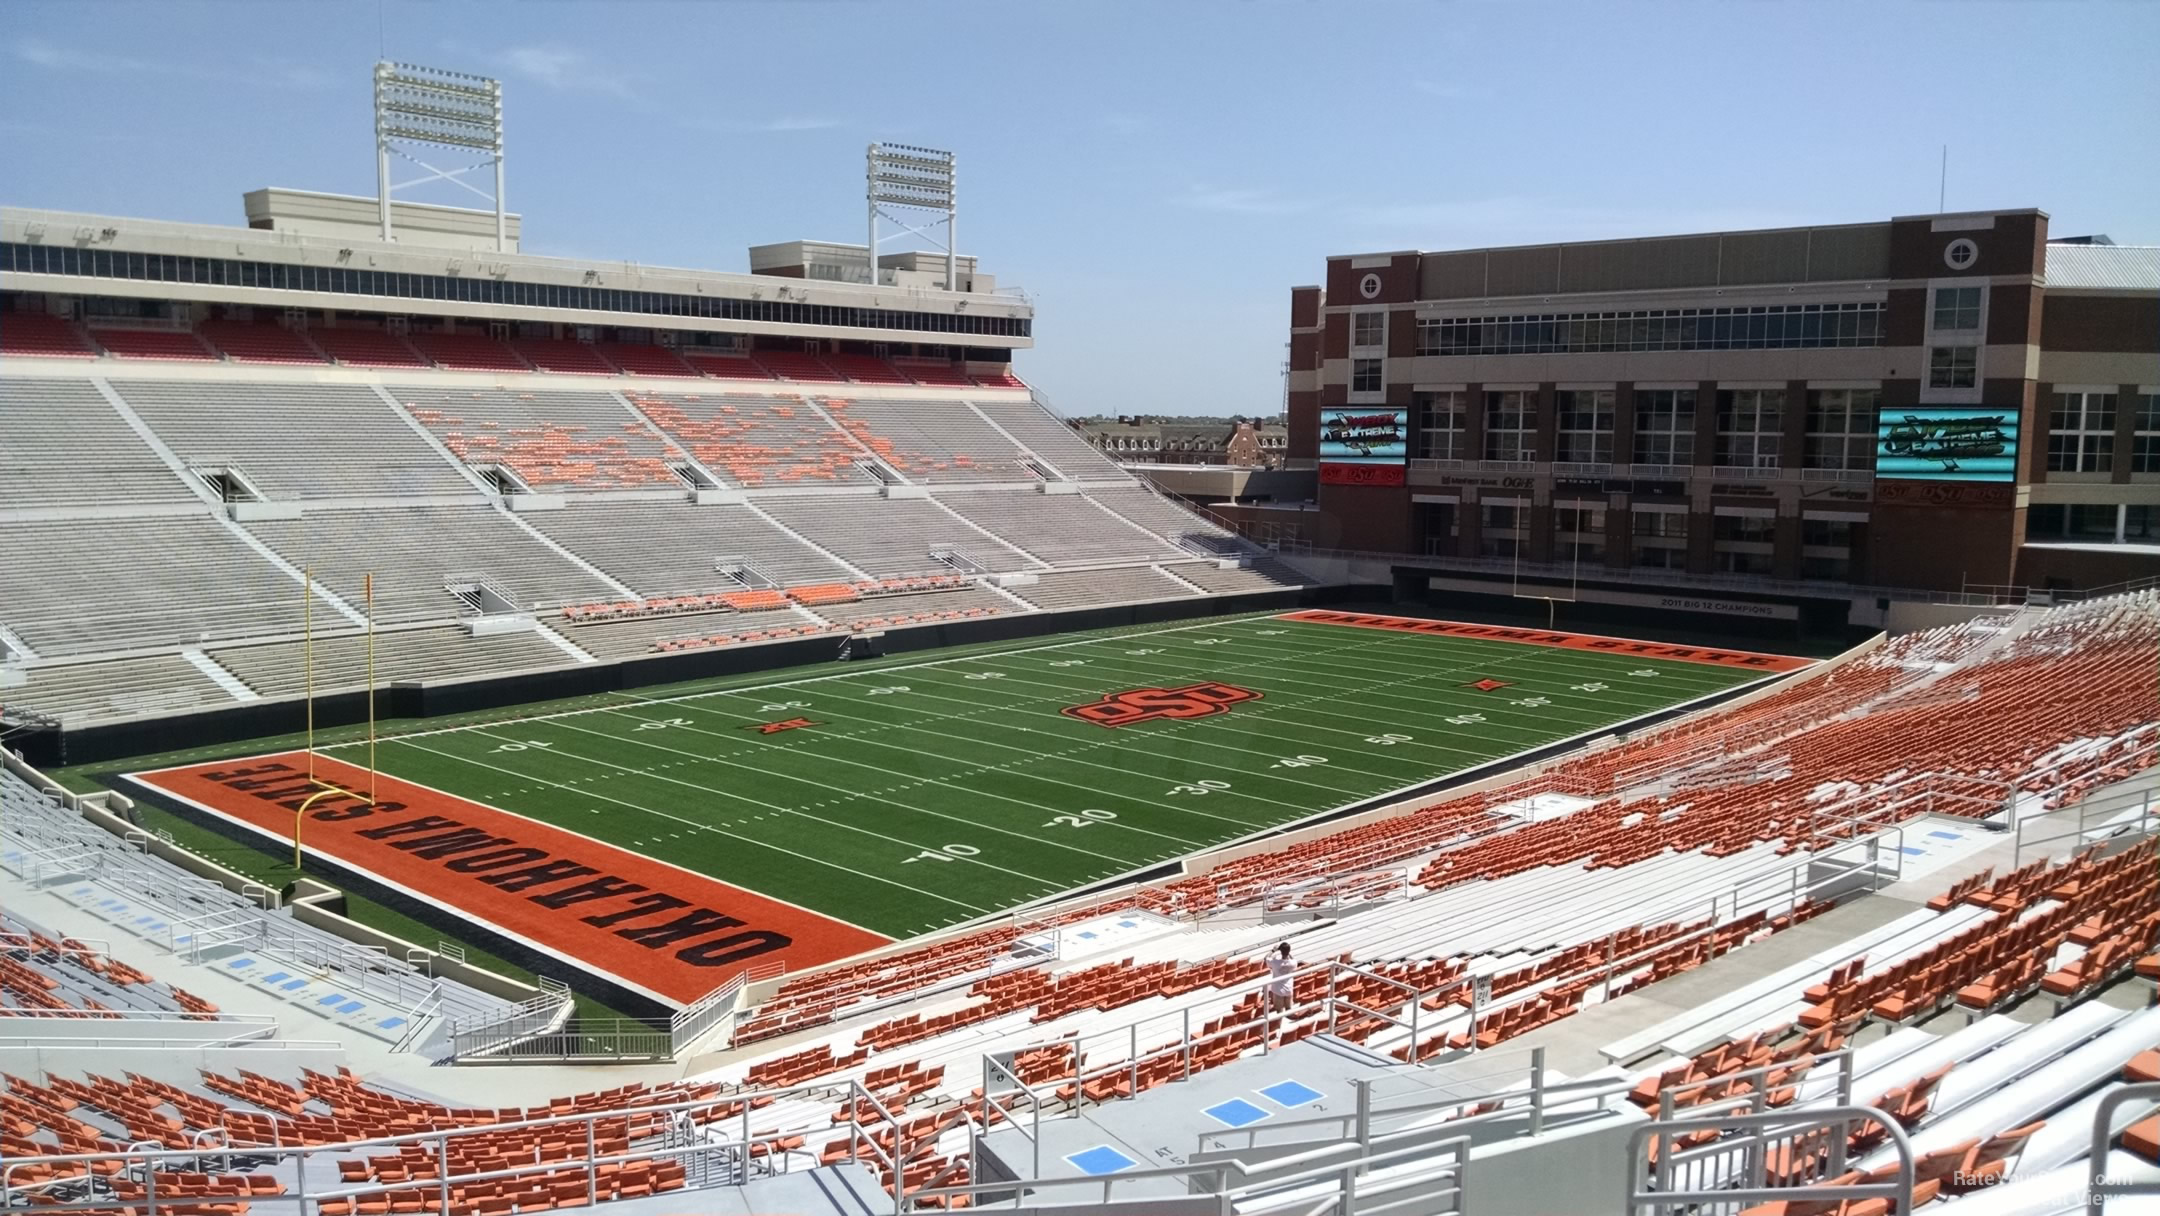 section 312, row 19 seat view  - boone pickens stadium